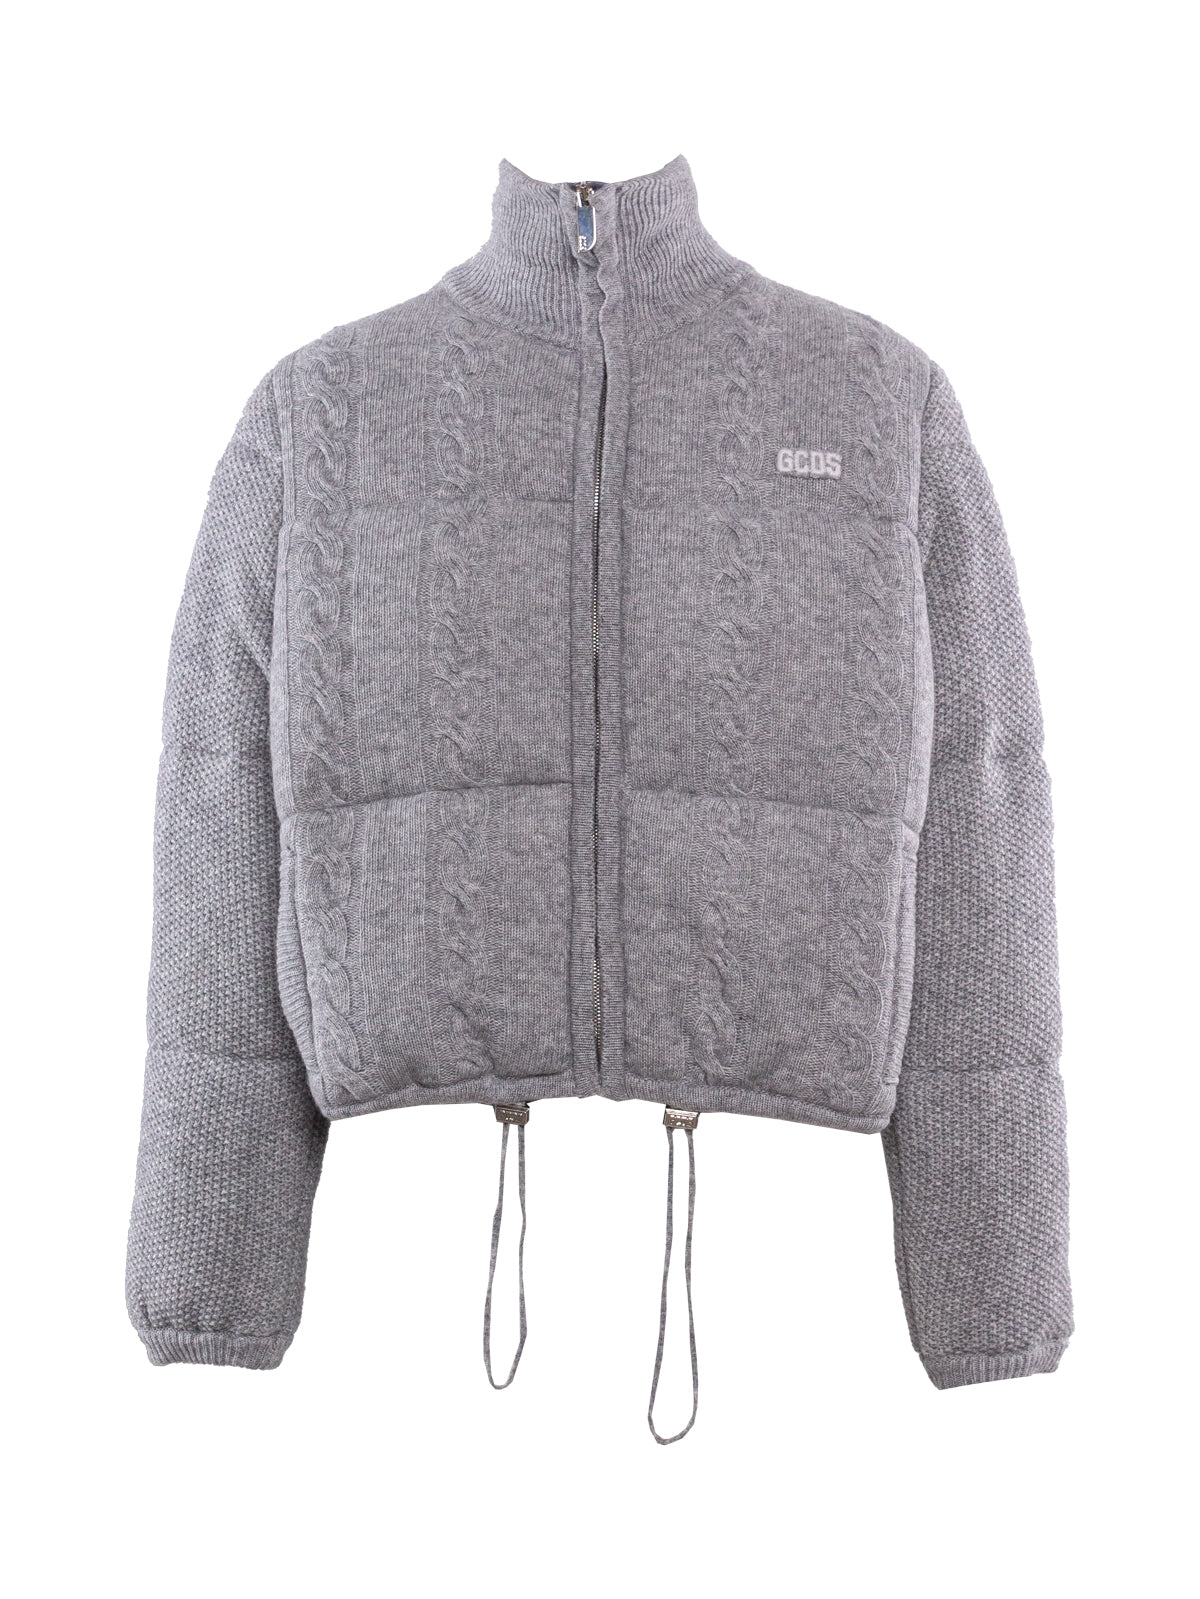 GCDS CABLE-KNIT ZIP-UP BOMBER JACKET